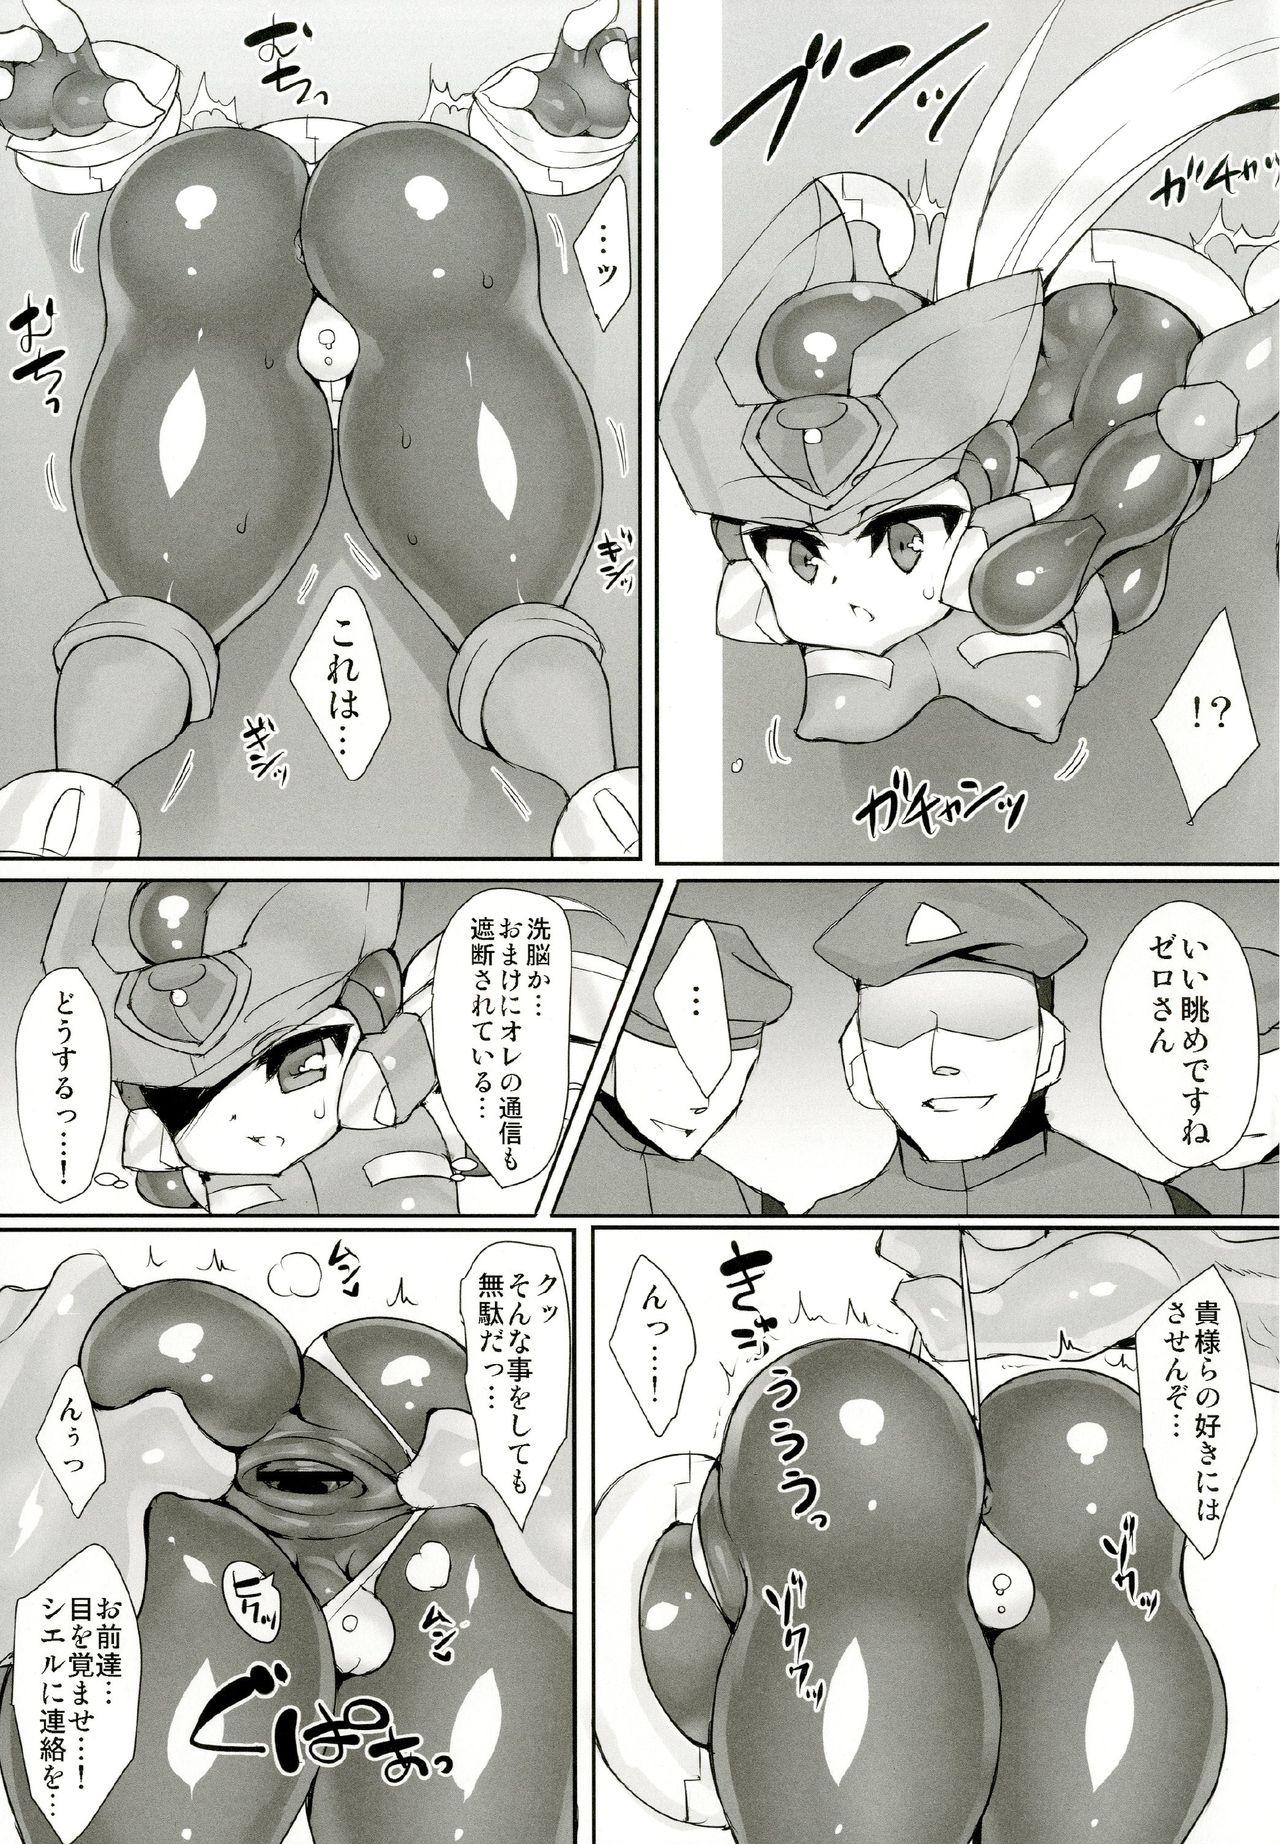 Doggy Style Red Hero Does Not Yield - Megaman zero Facebook - Page 7